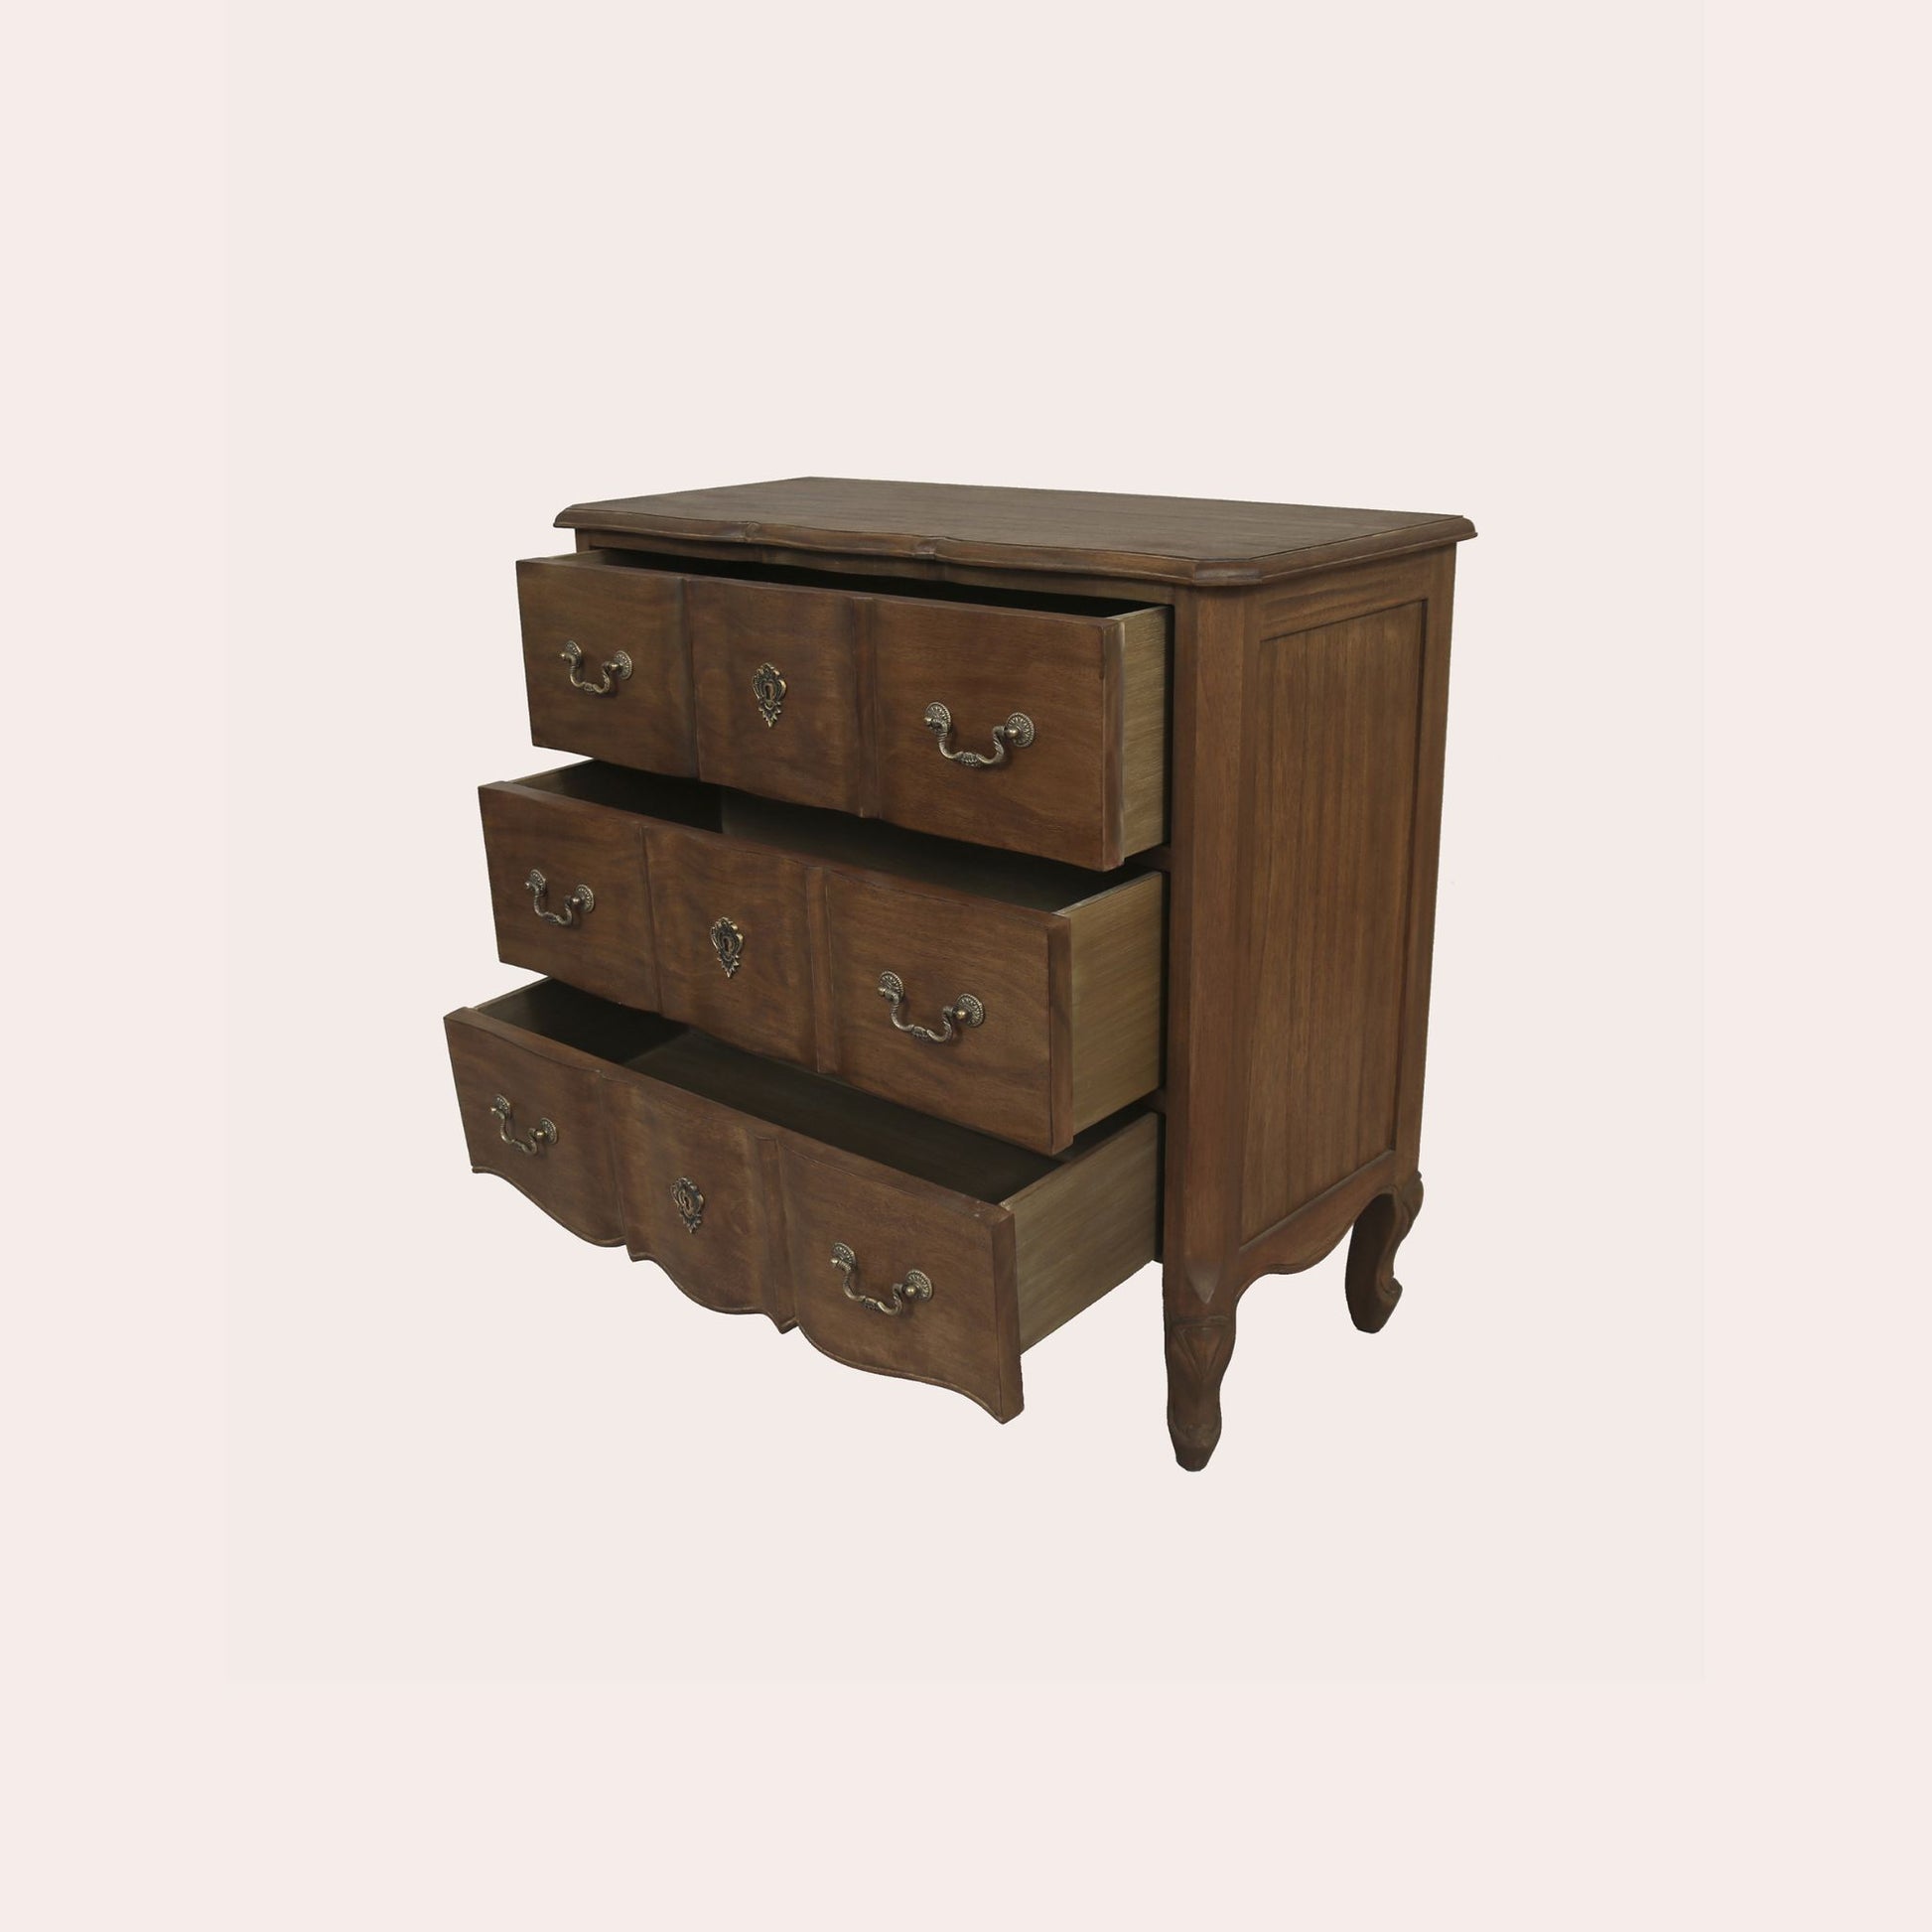 Side view of walnut 3 drawer chest with drawers open showing ample storage